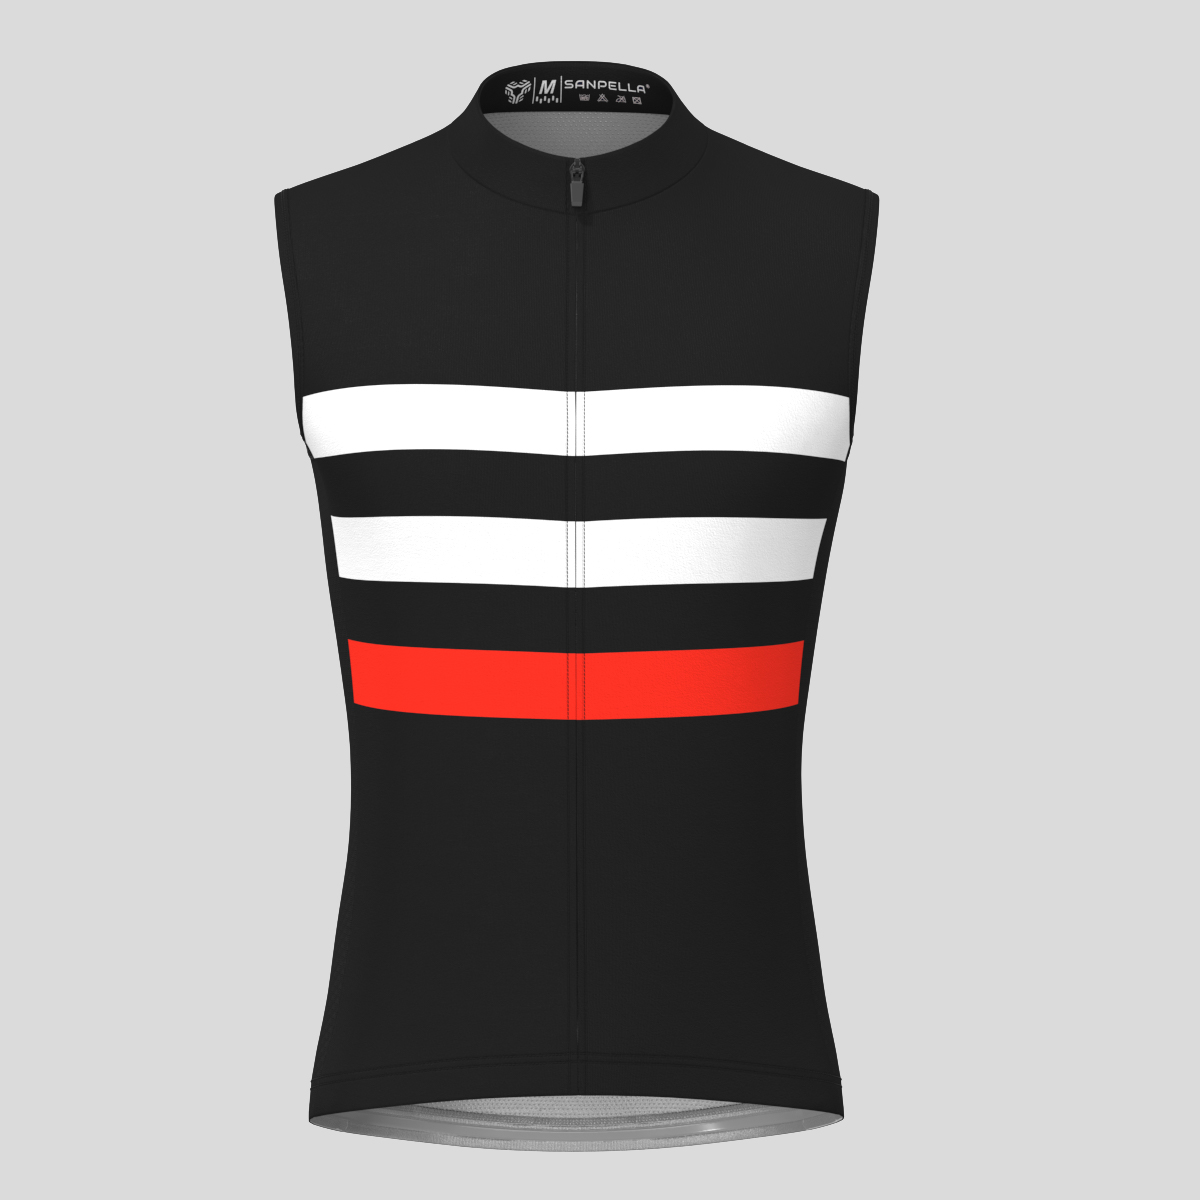 Men's Classic Stripes Sleeveless Cycling Jersey - Black/White/Red